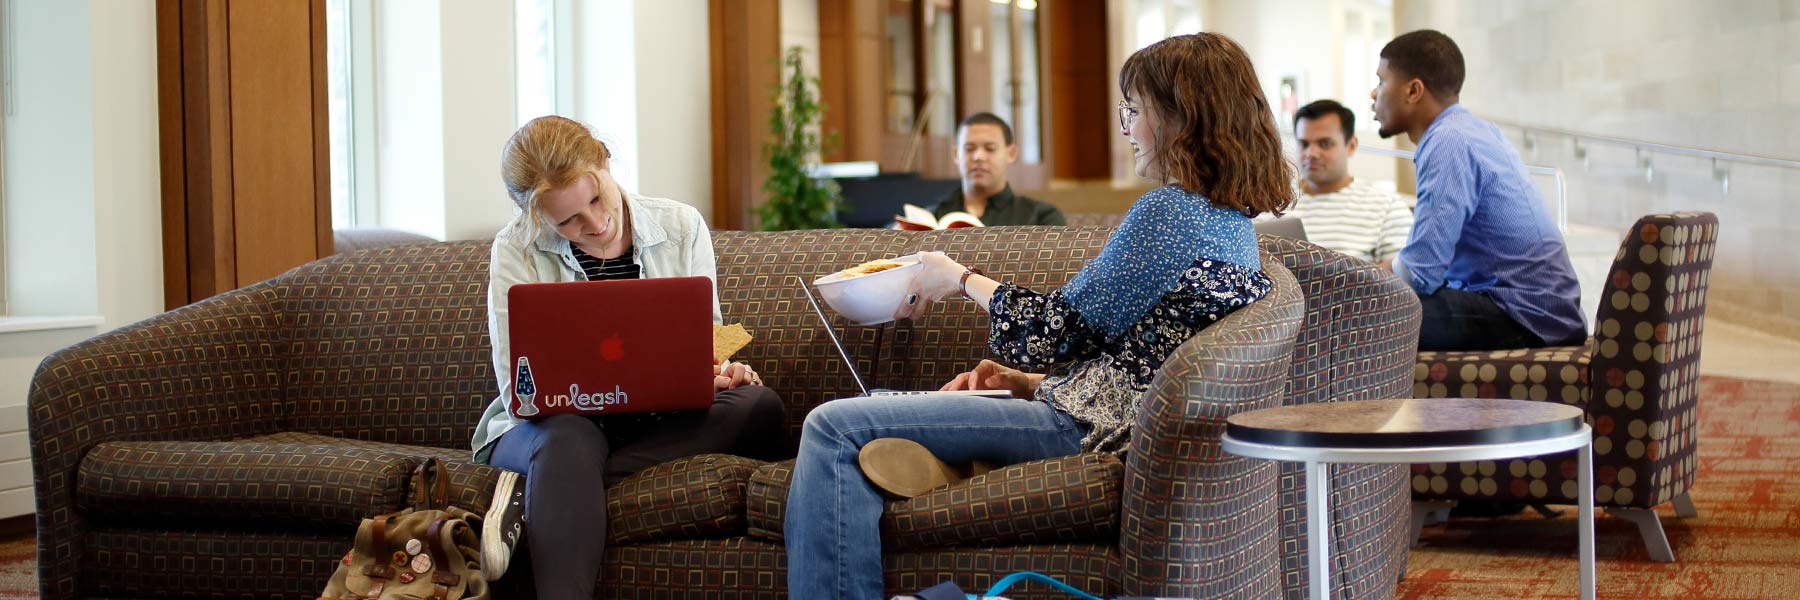 Students study in a lounge